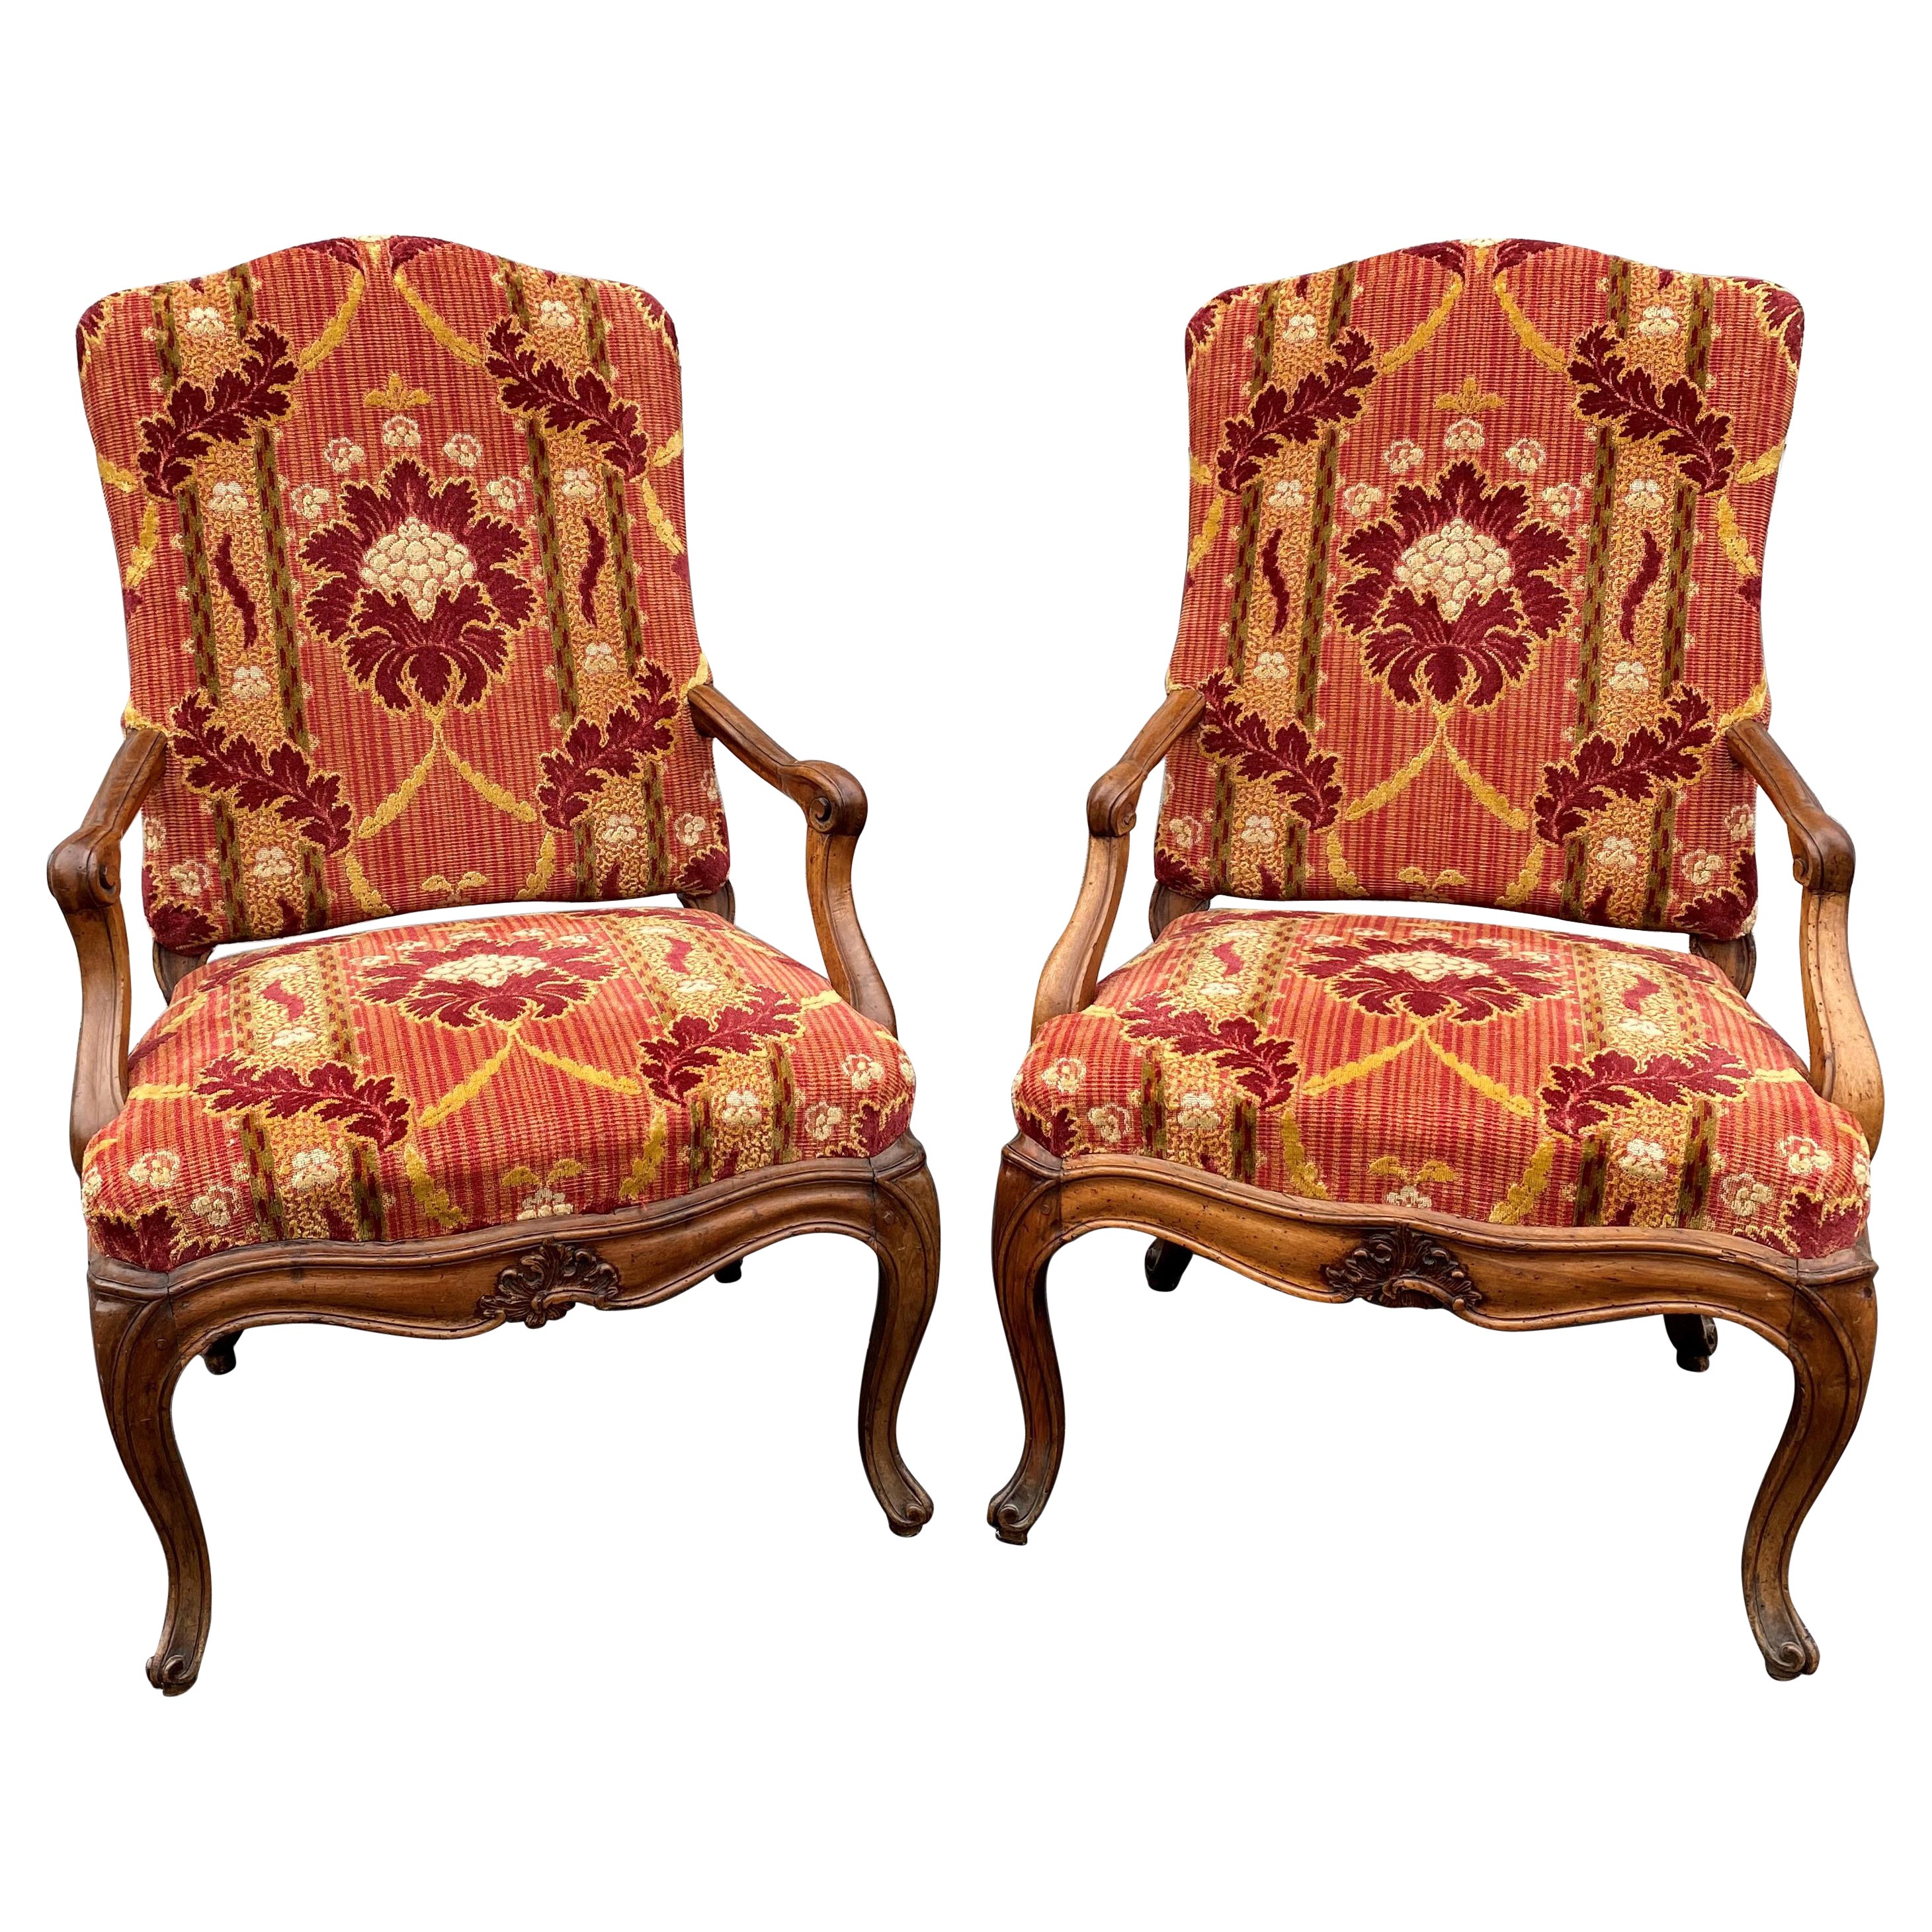 19th c Louis XV Style Foliate Upholstered Fruitwood Armchairs